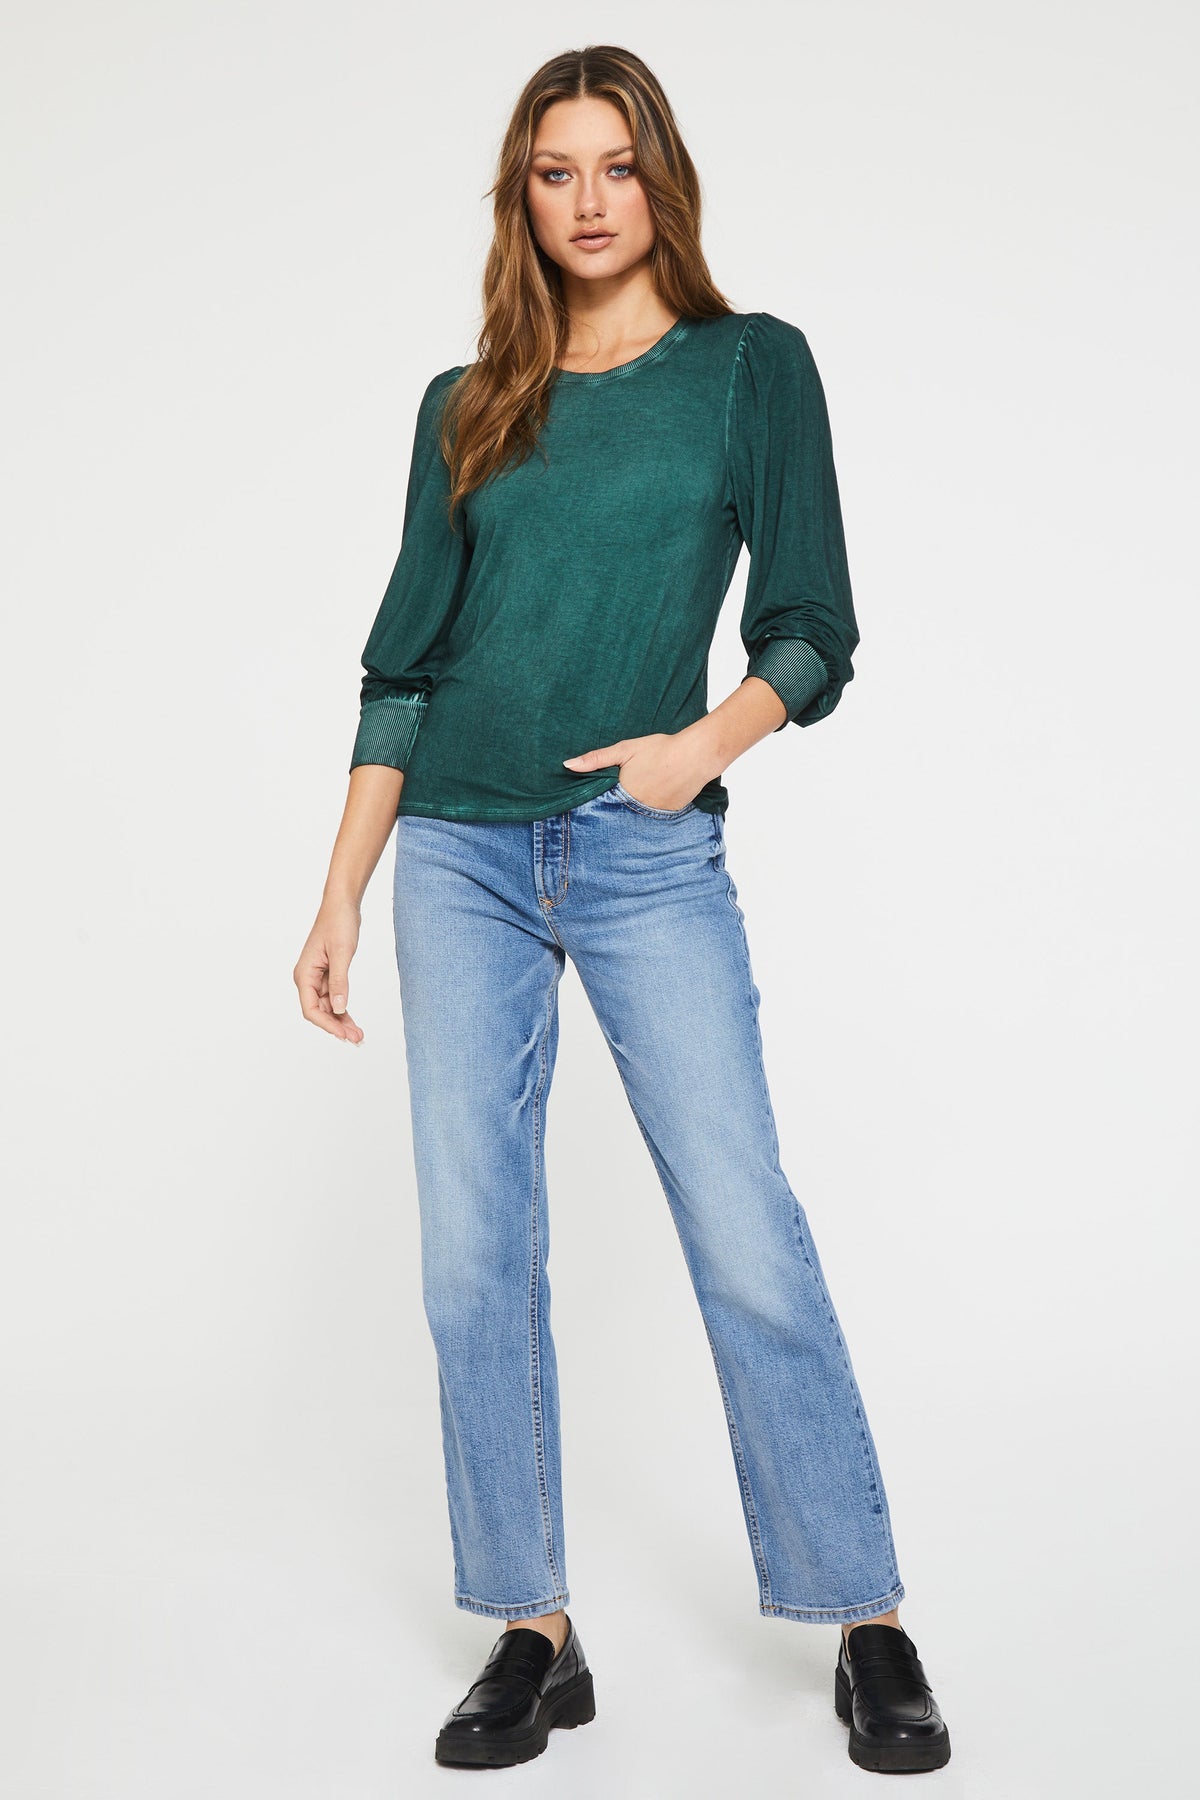 mica-ruched-long-sleeve-top-emerald-full-image-another-love-clothing